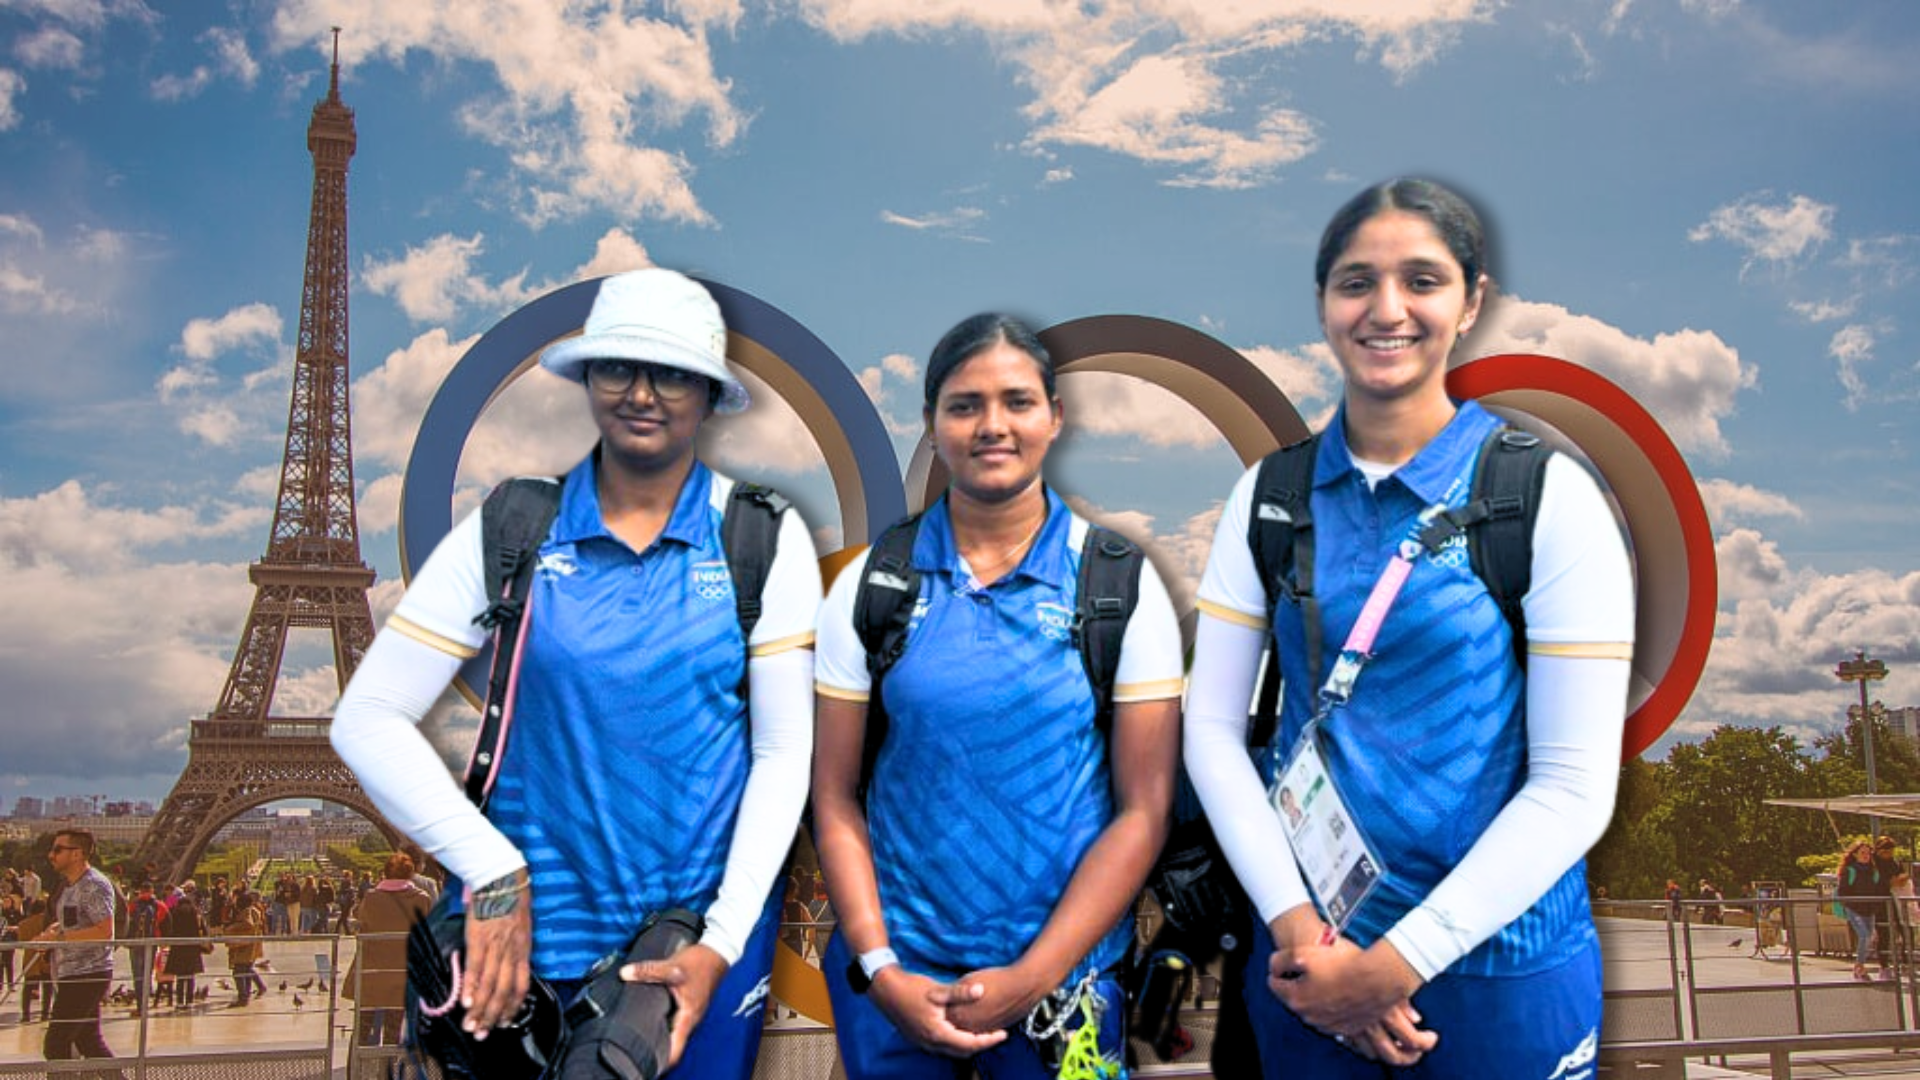 India Secures Direct Quarter-Final Spot in Women’s Archery at Paris Olympics